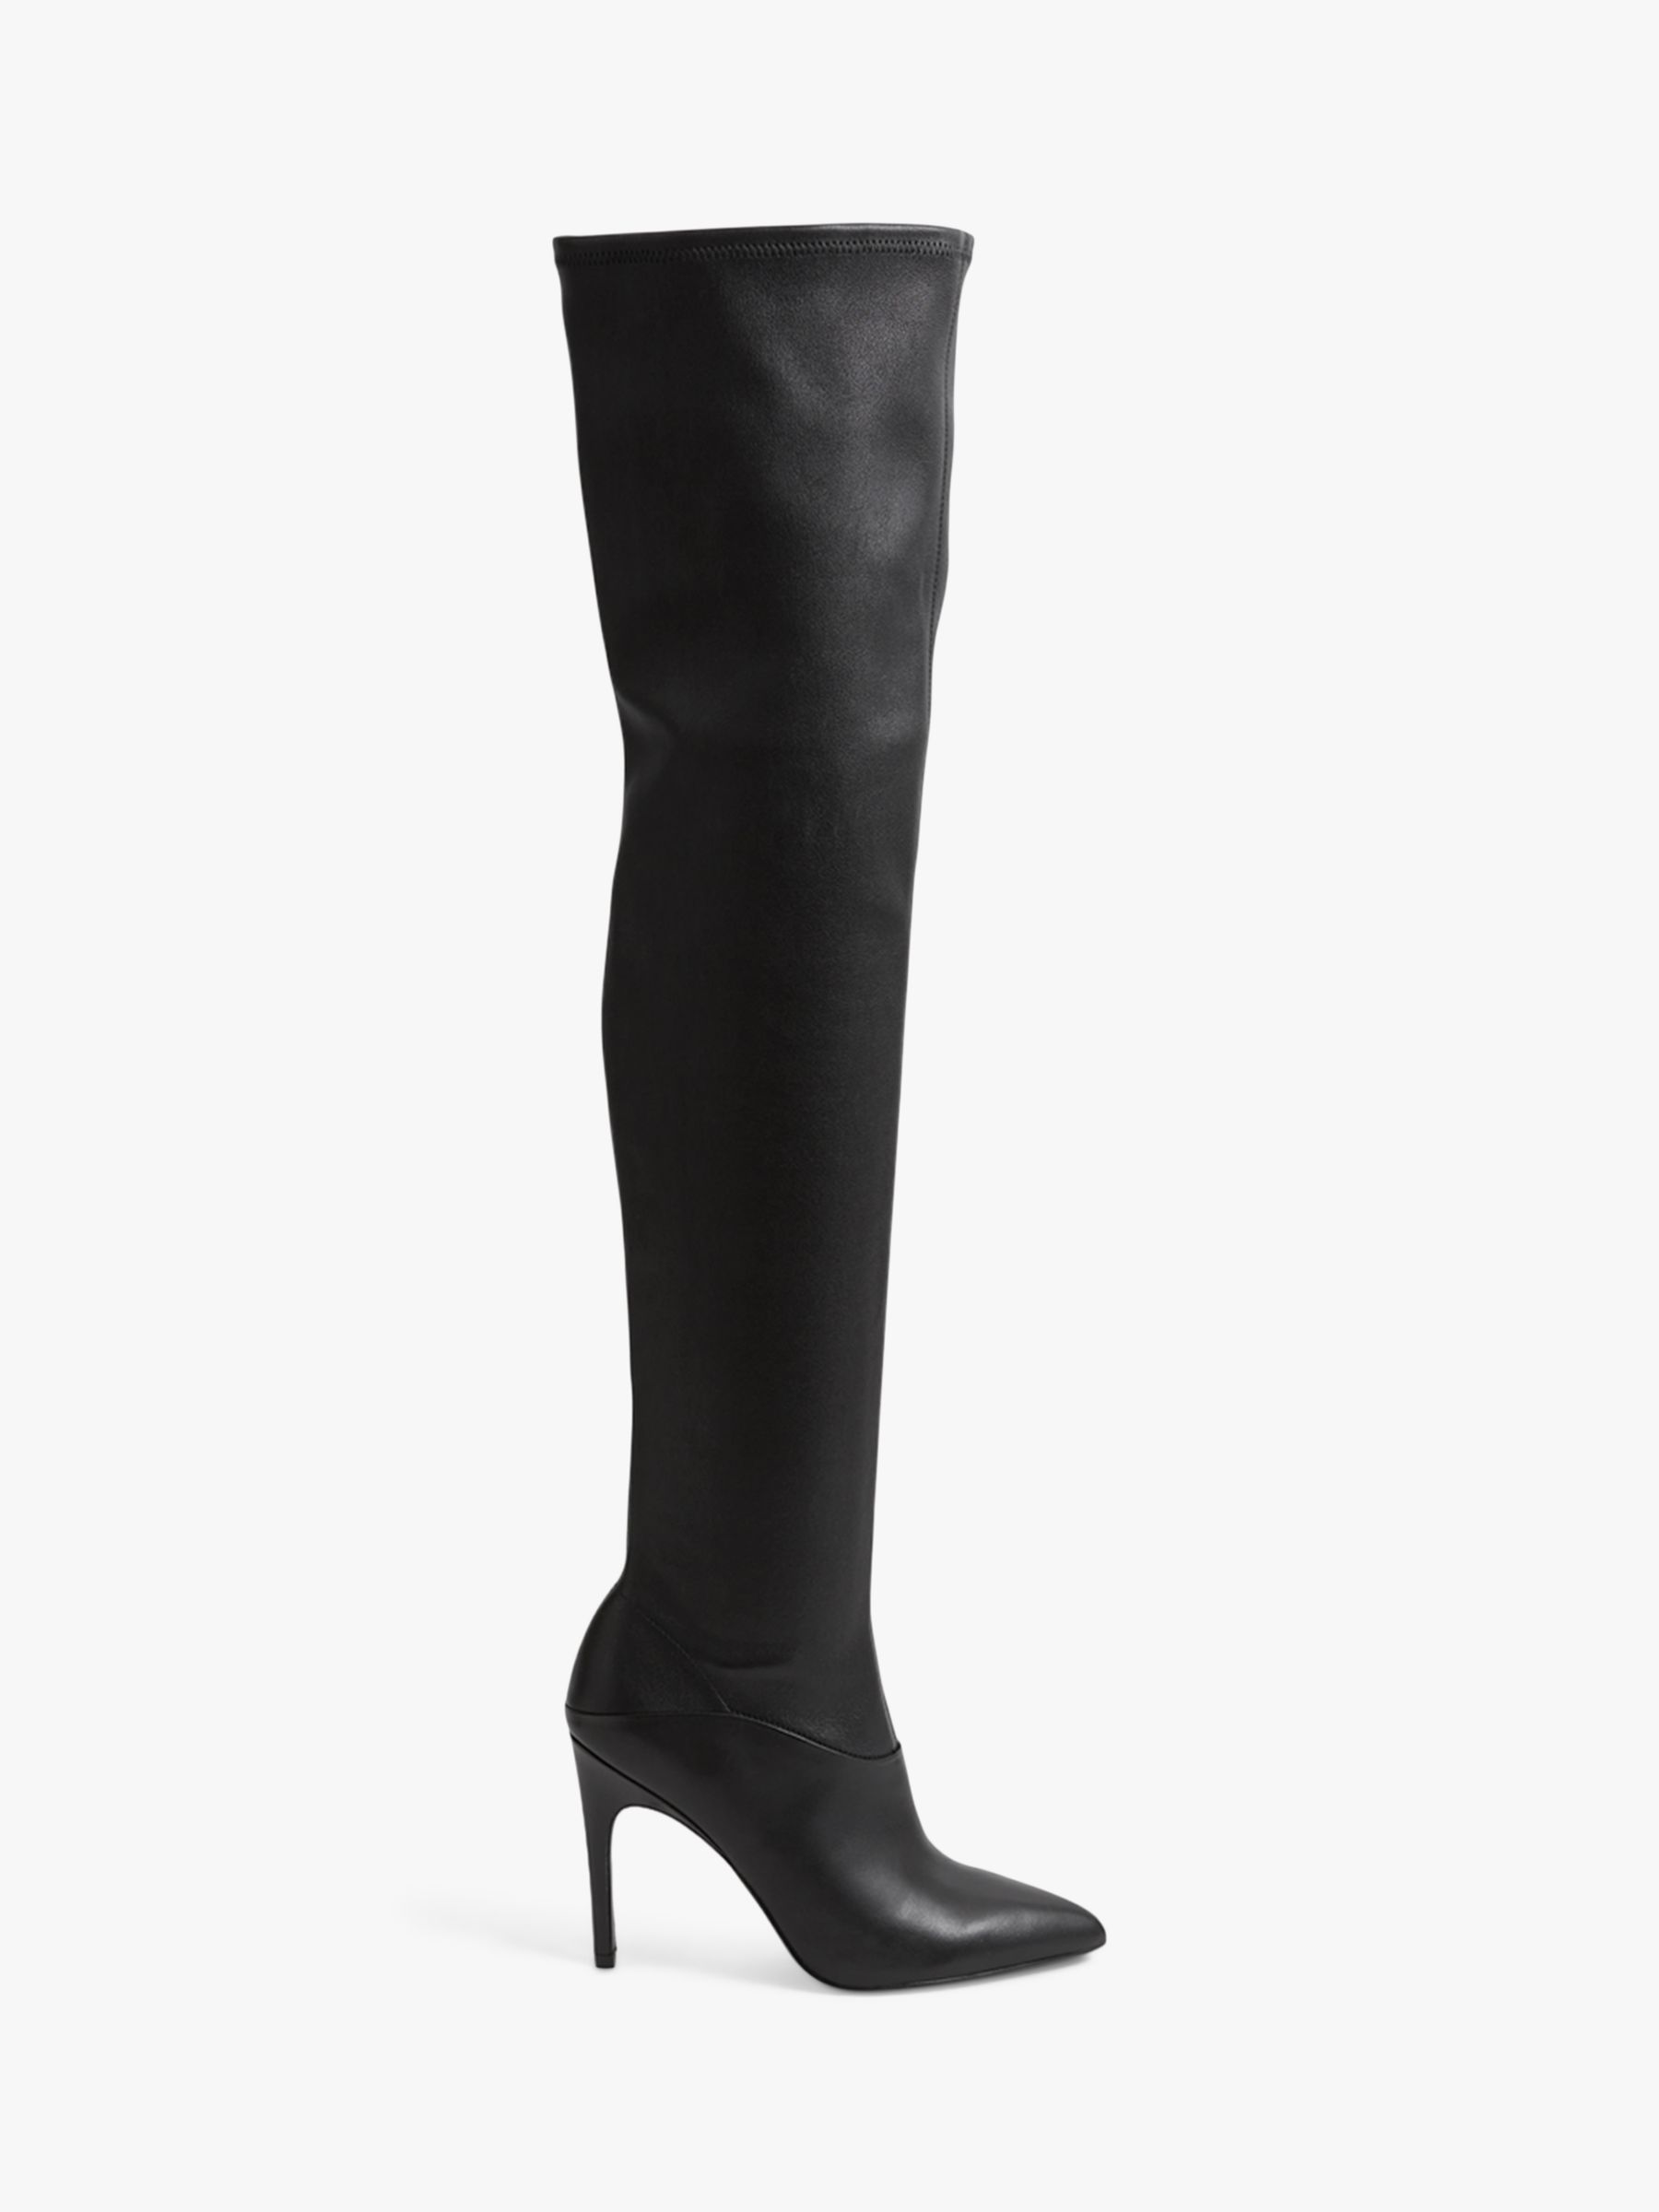 Reiss Caia Leather Thigh High Heeled Boots, Black, 3